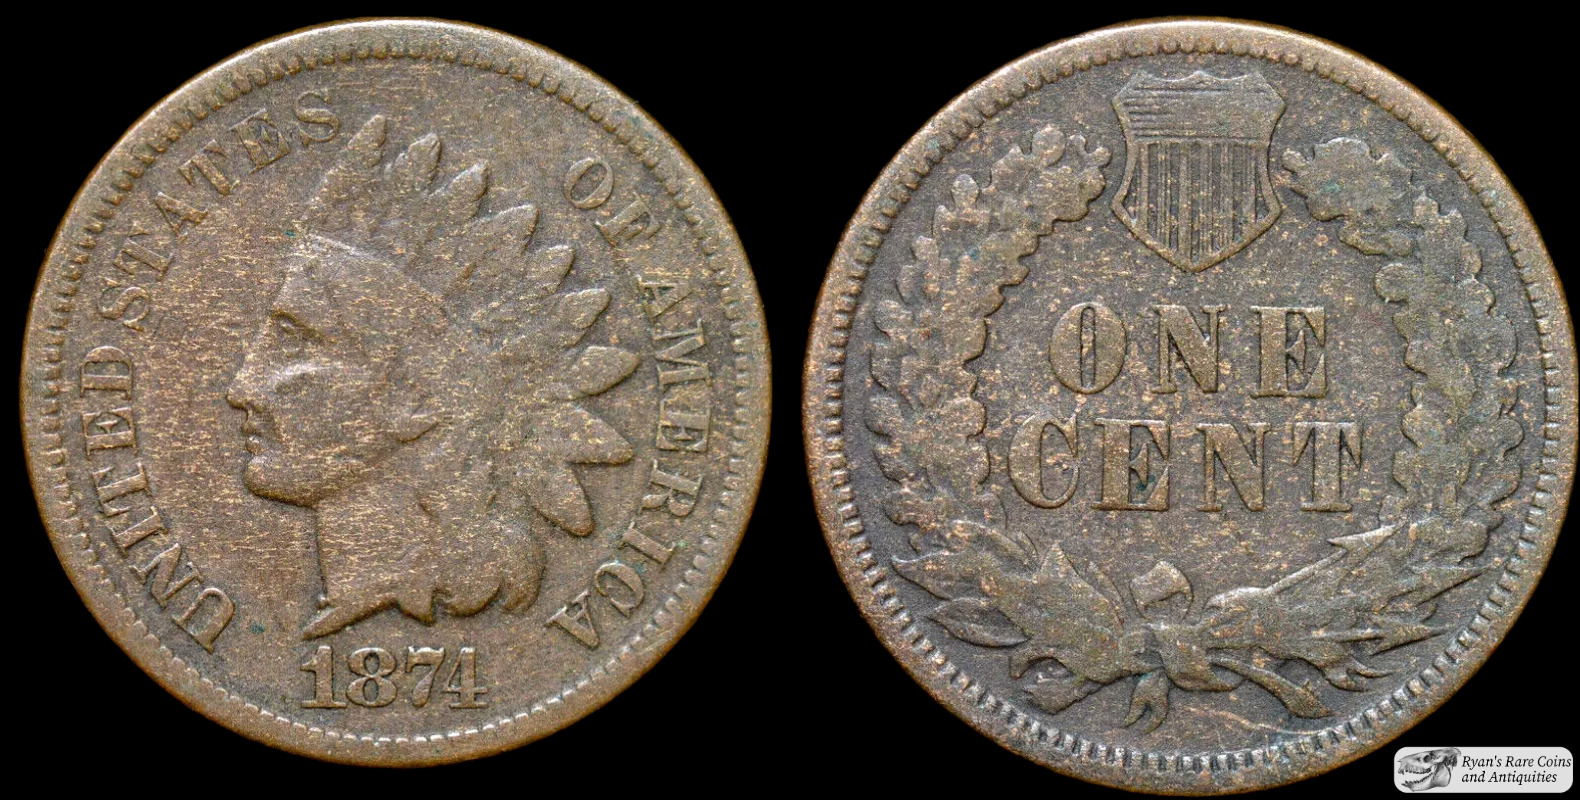 1874 Indian Head Cent, Good+ Condition, United States, , C4393